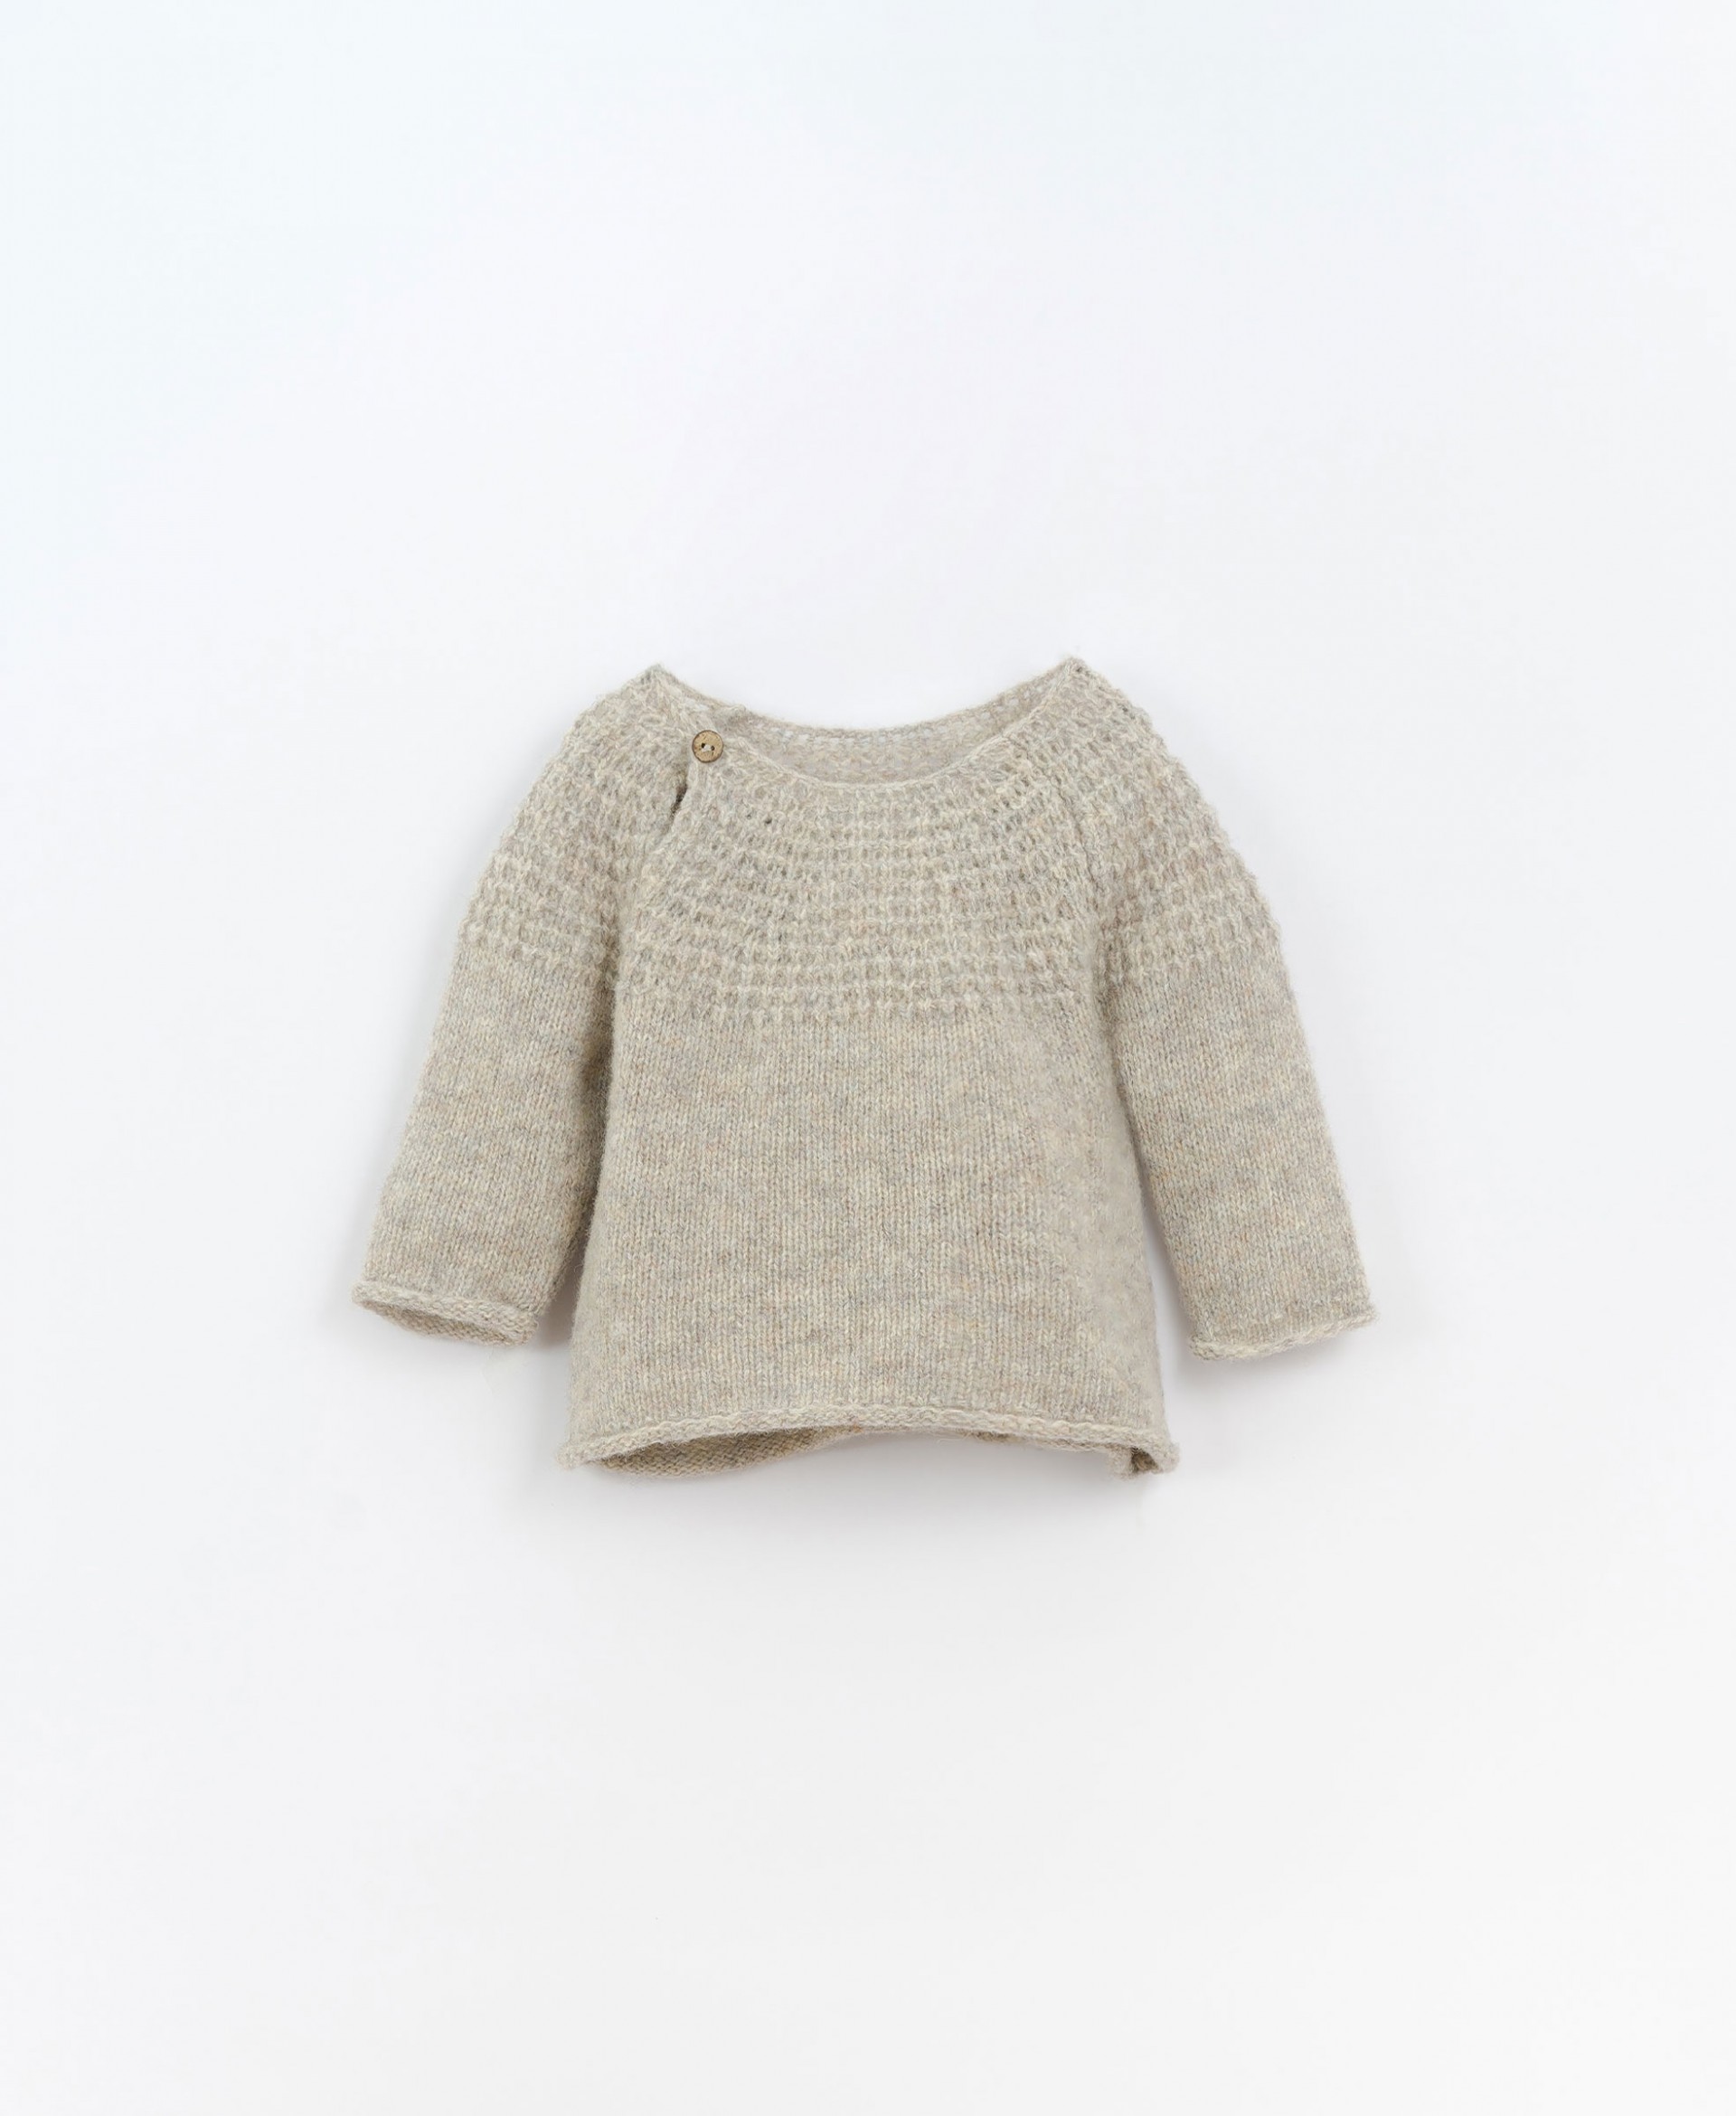 Knitted jersey with coconut button | Culinary